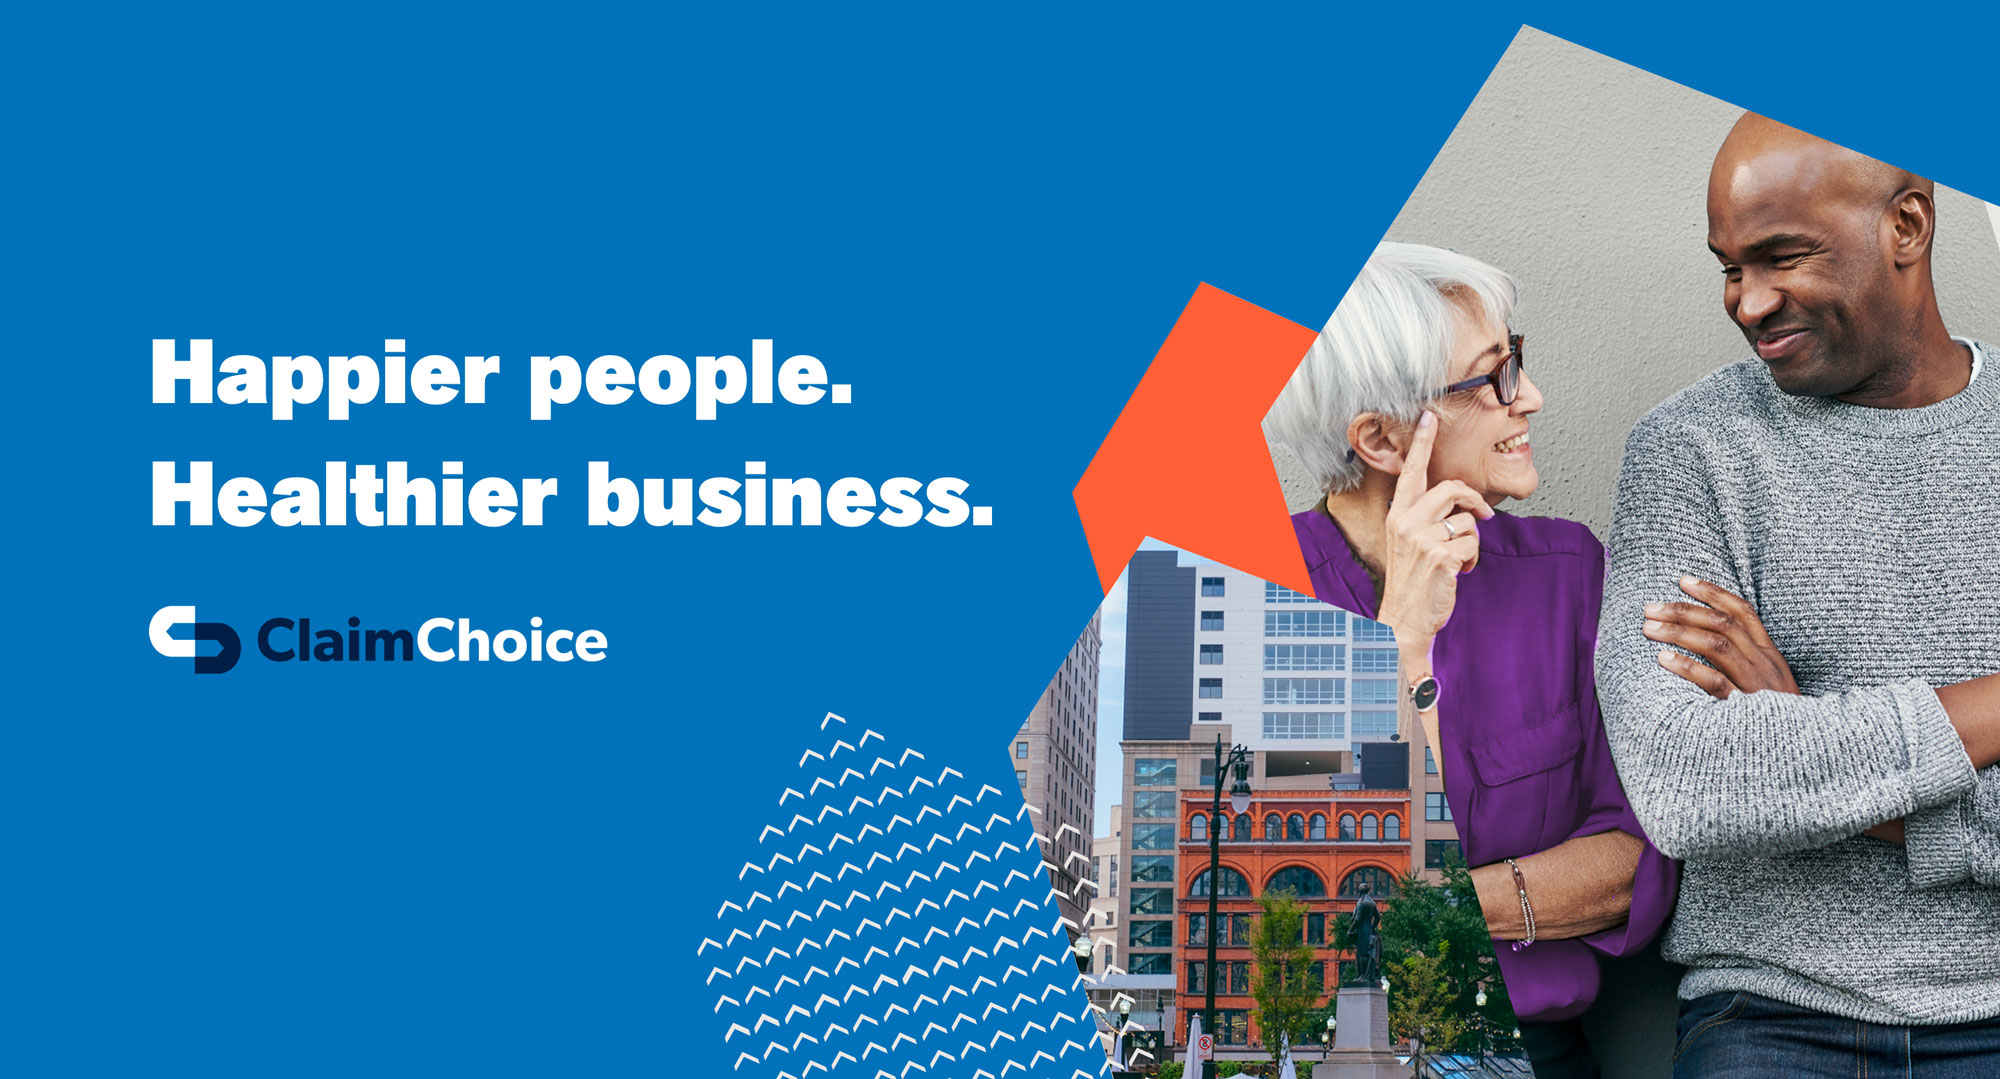 ClaimChoice's new Branding - Happier people, healthier business.